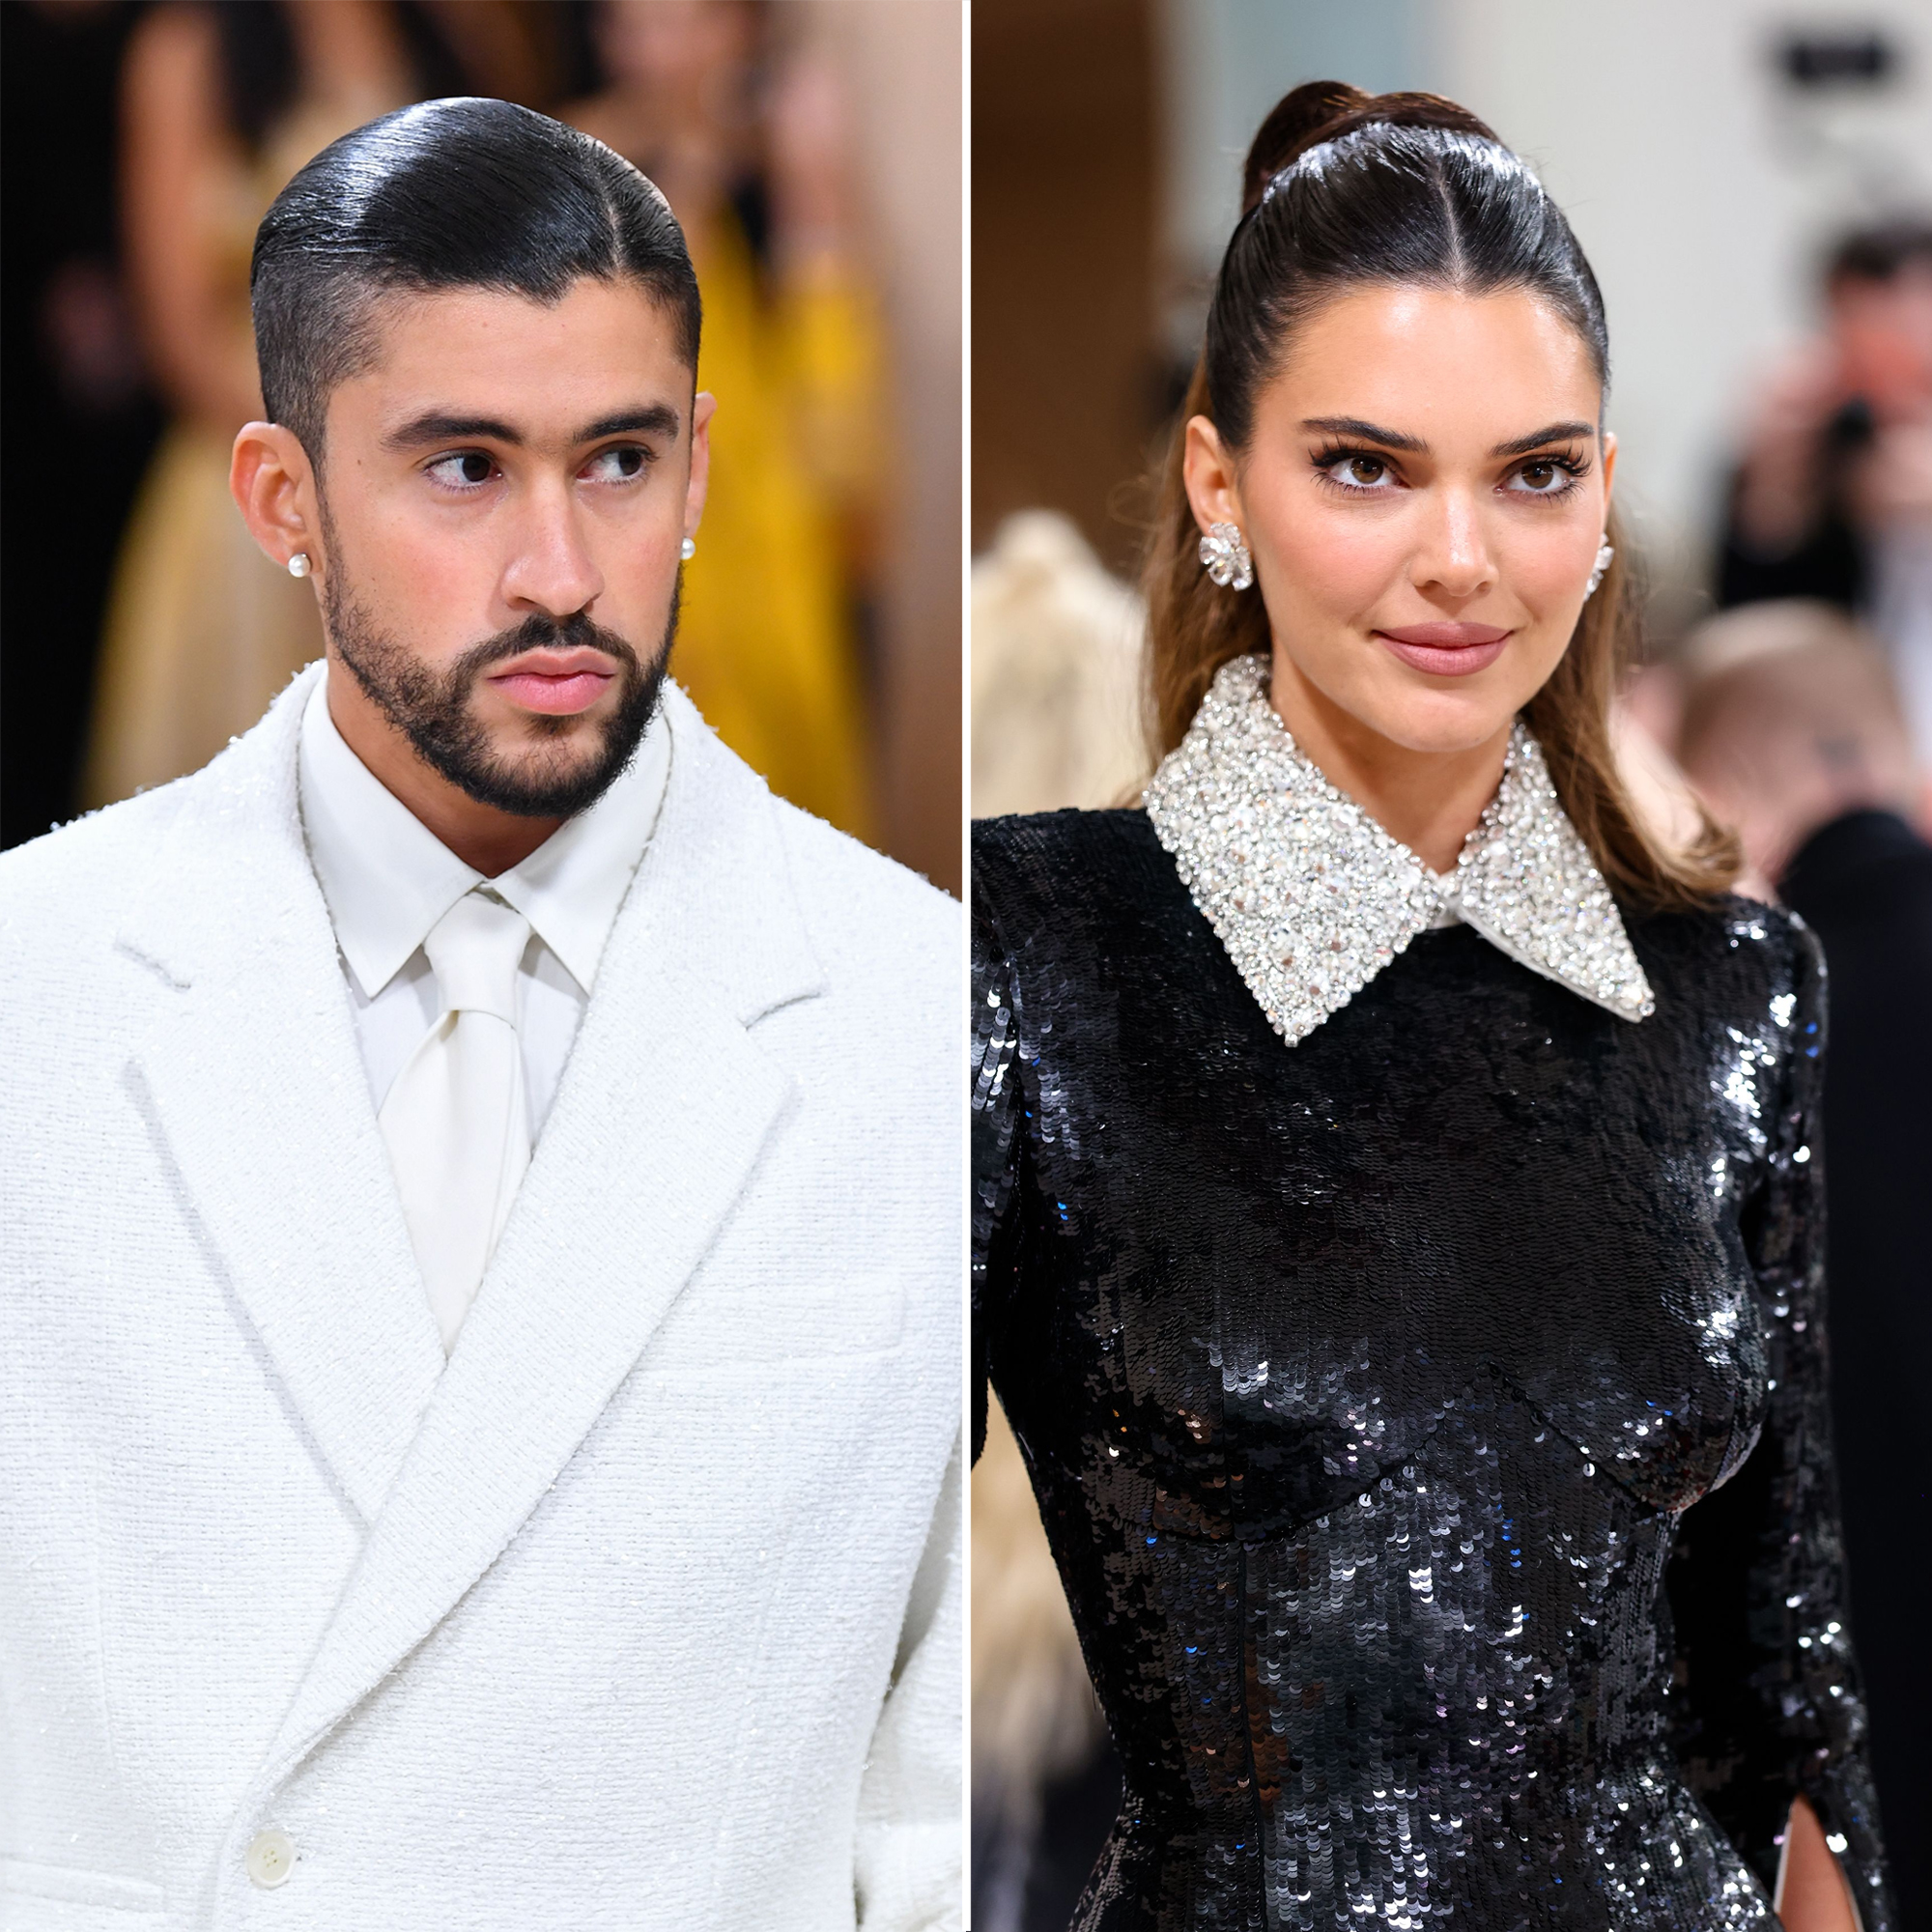 Kendall Jenner's Dating History: From Harry Styles to Bad Bunny